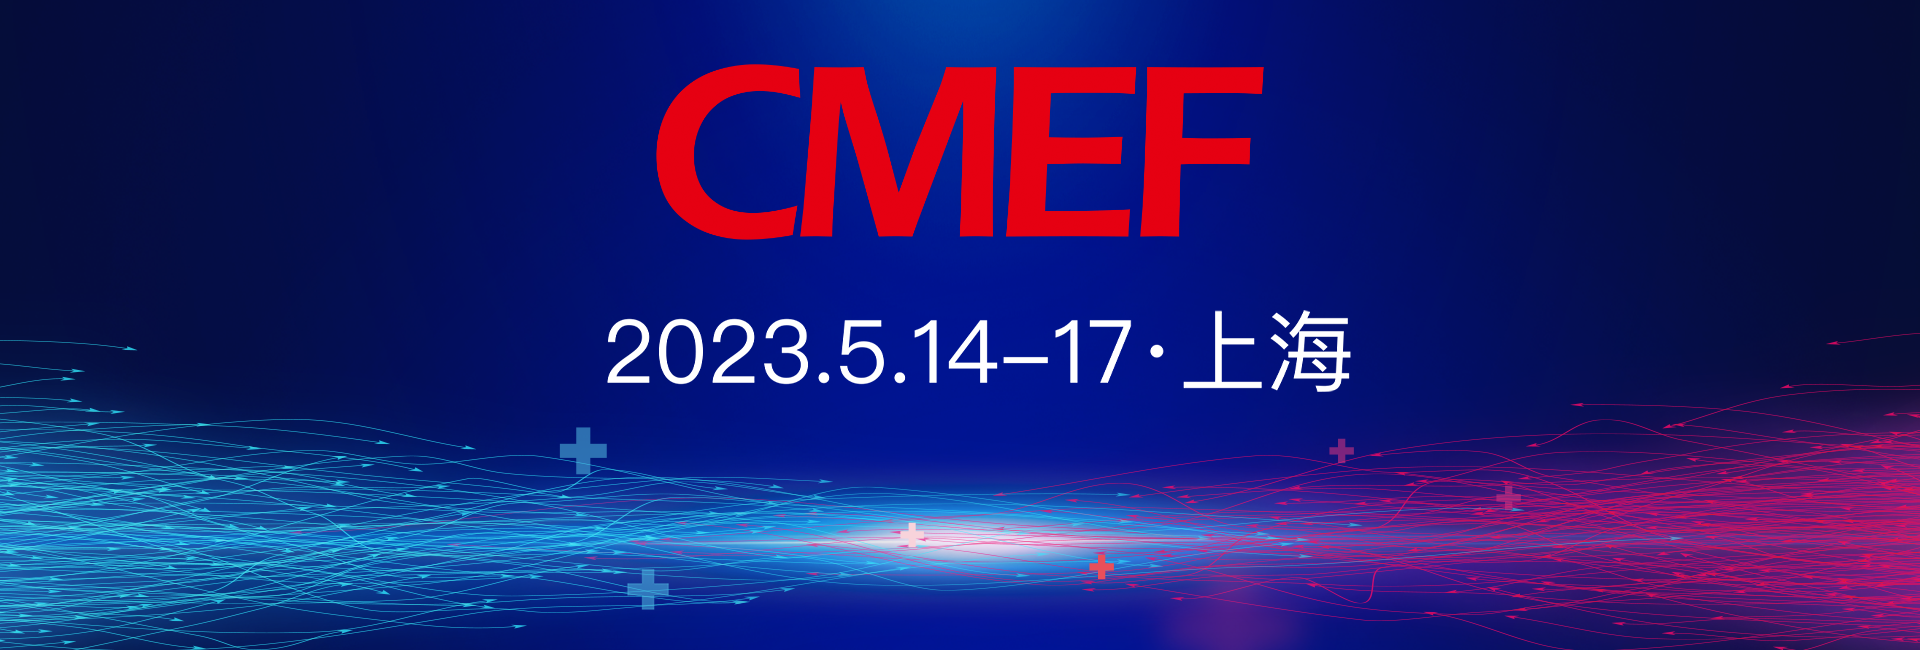 【 Invitation Letter 】 The 87th China International Medical Device Expo